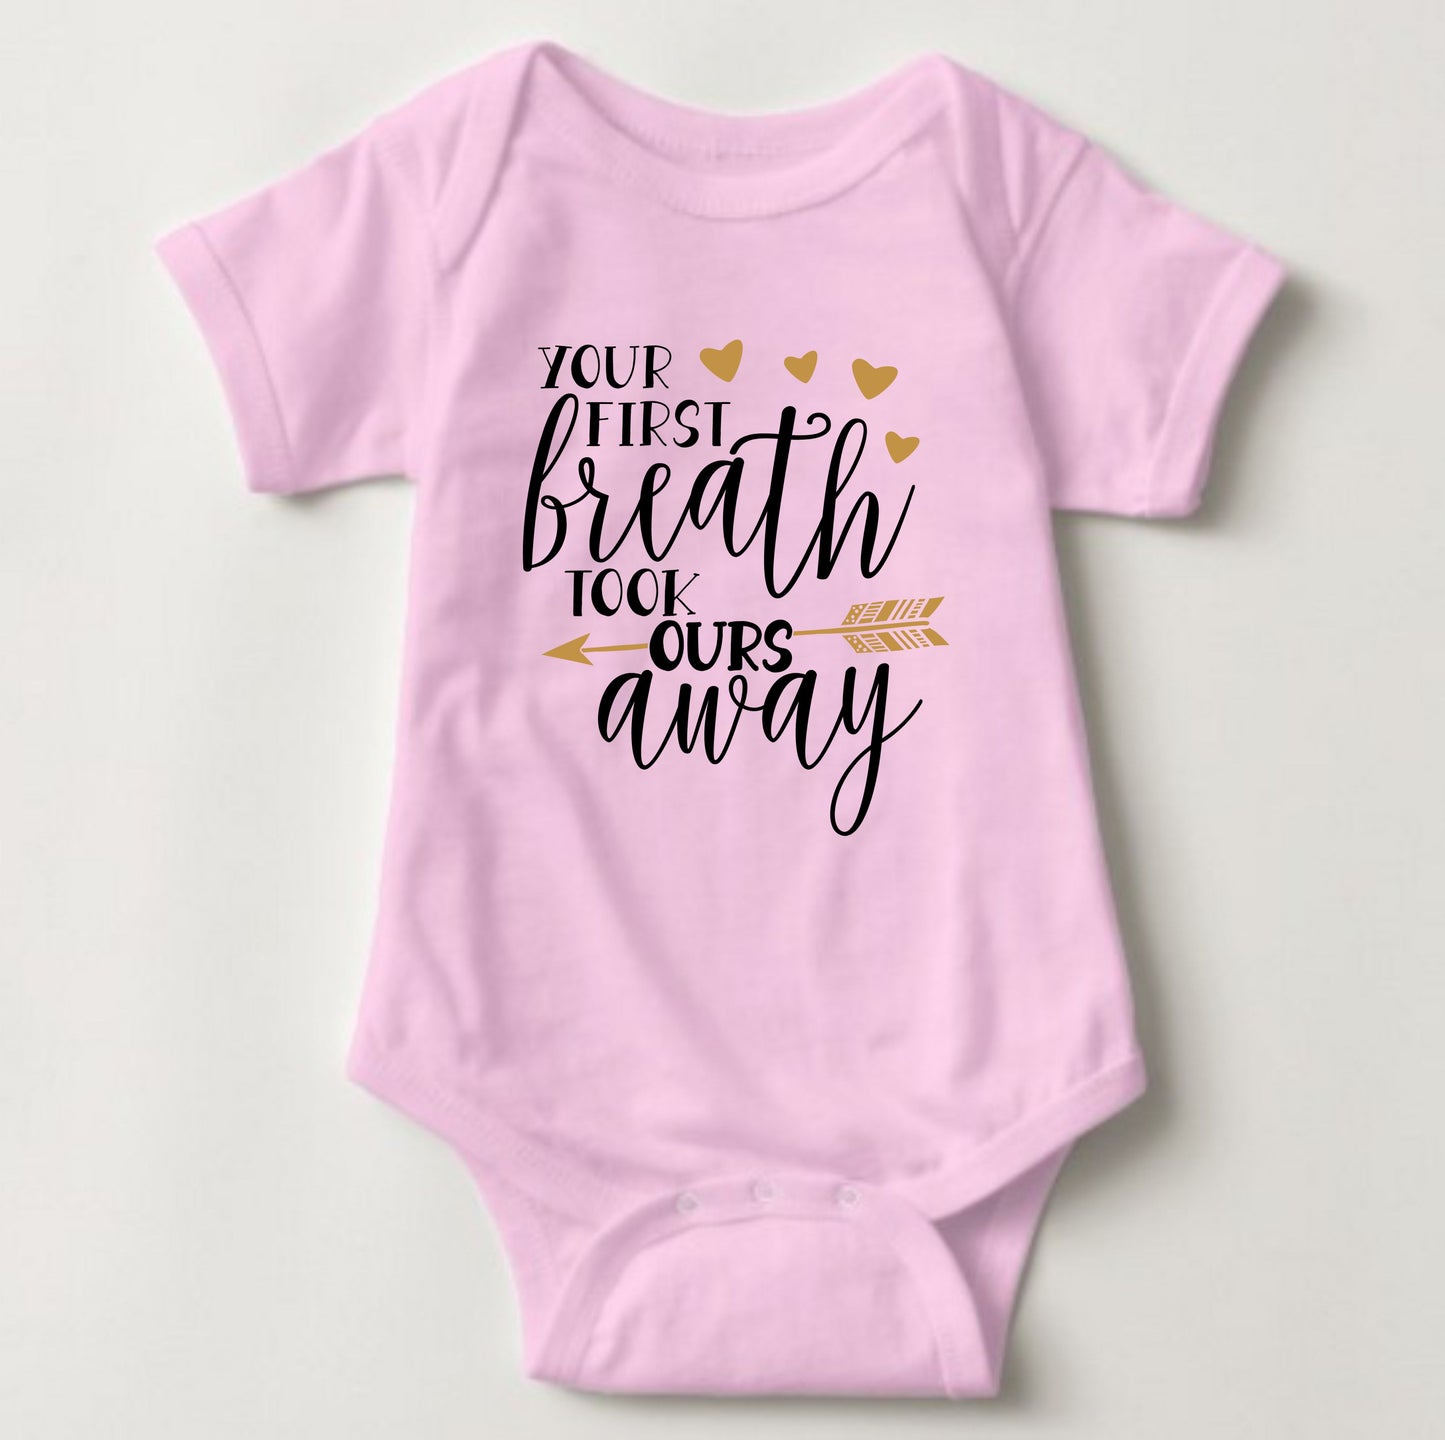 Baby Statement Onesies - Your First Breath Took ours Away - MYSTYLEMYCLOTHING